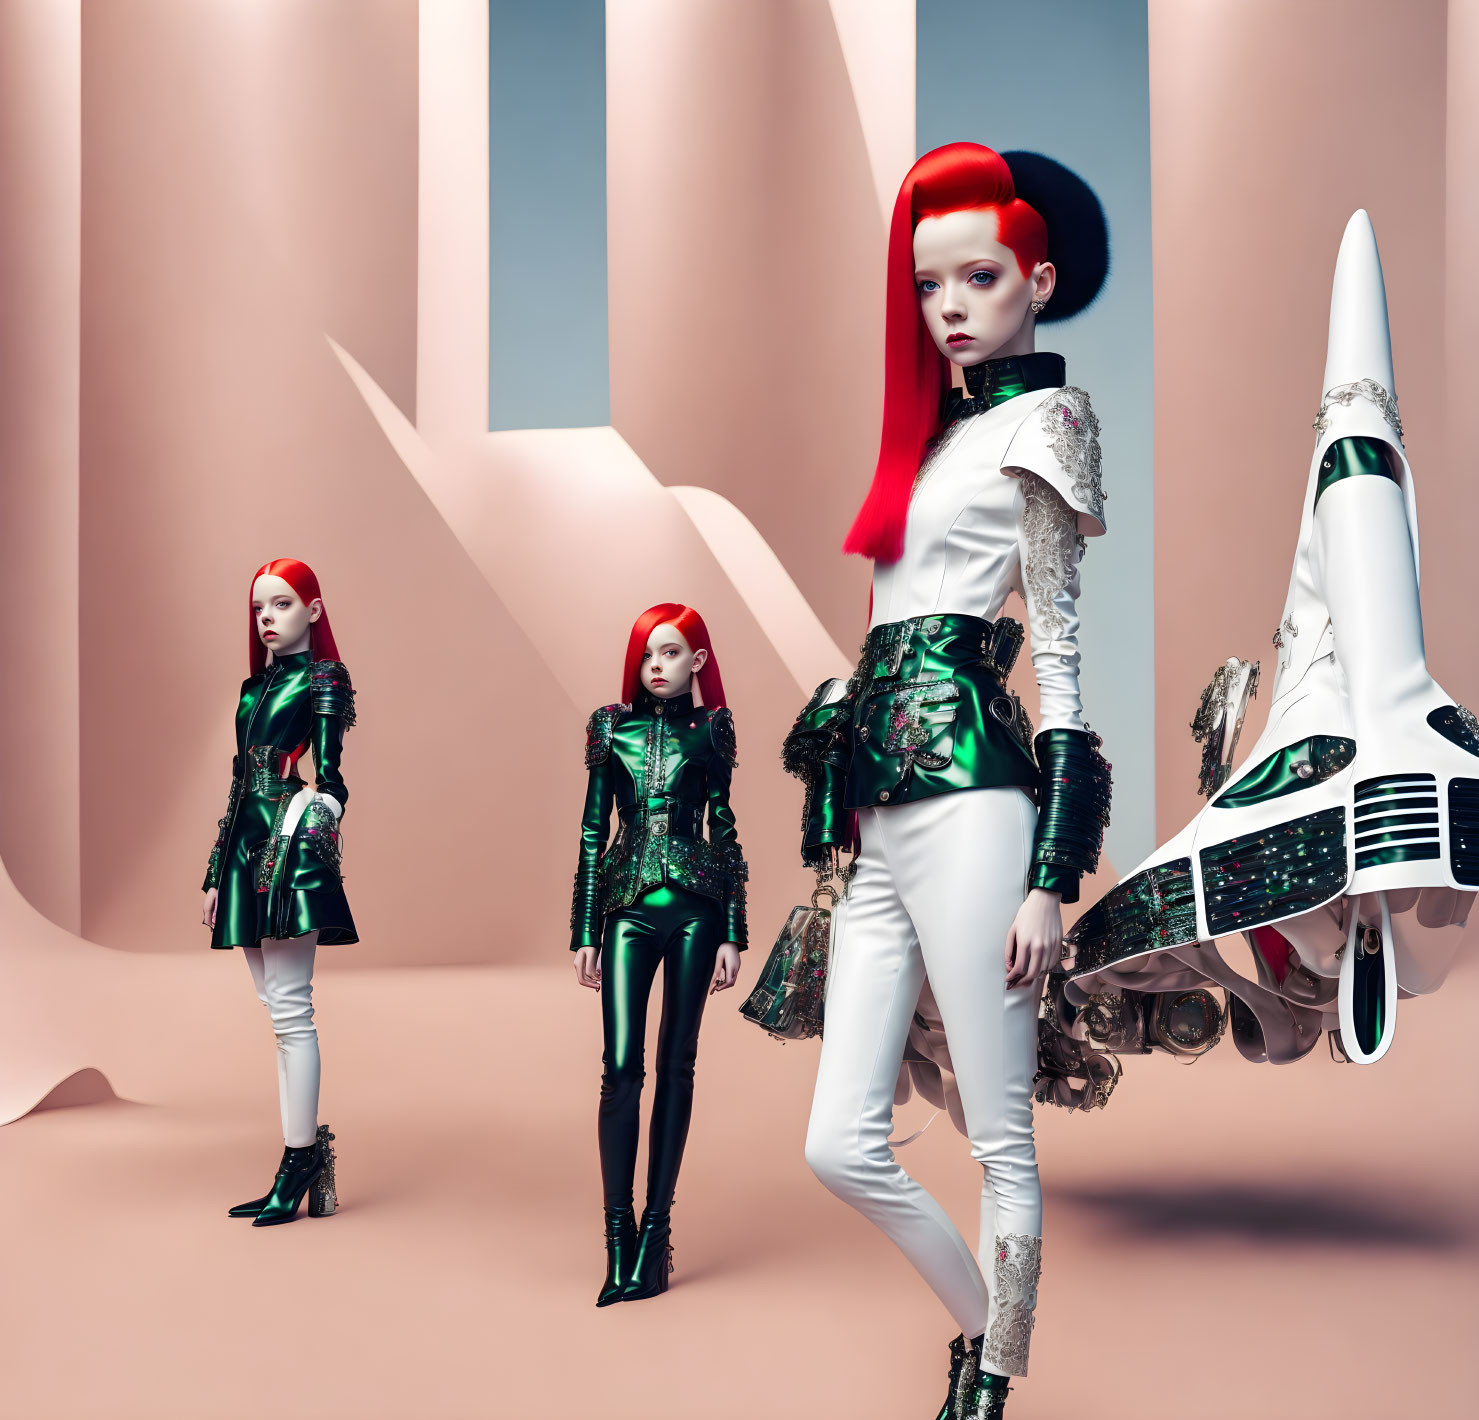 Futuristic fashion models with red hair posing by white spaceship